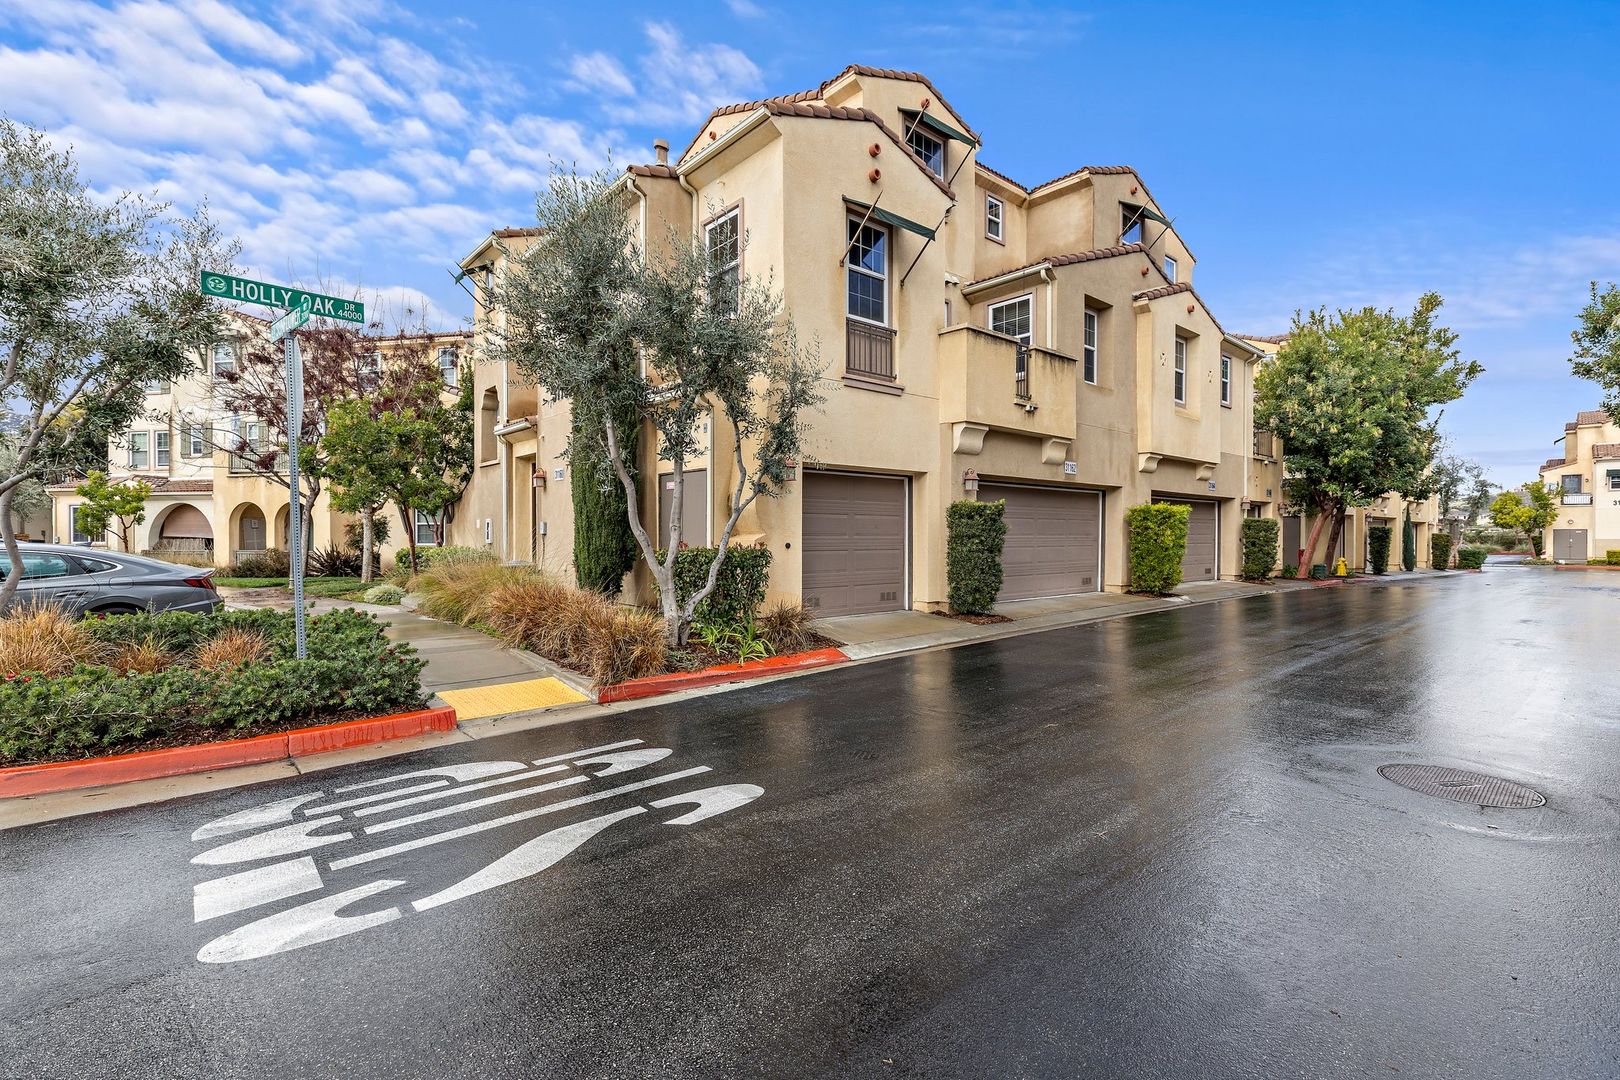 Three Bedroom Gated Community Condo in South Temecula